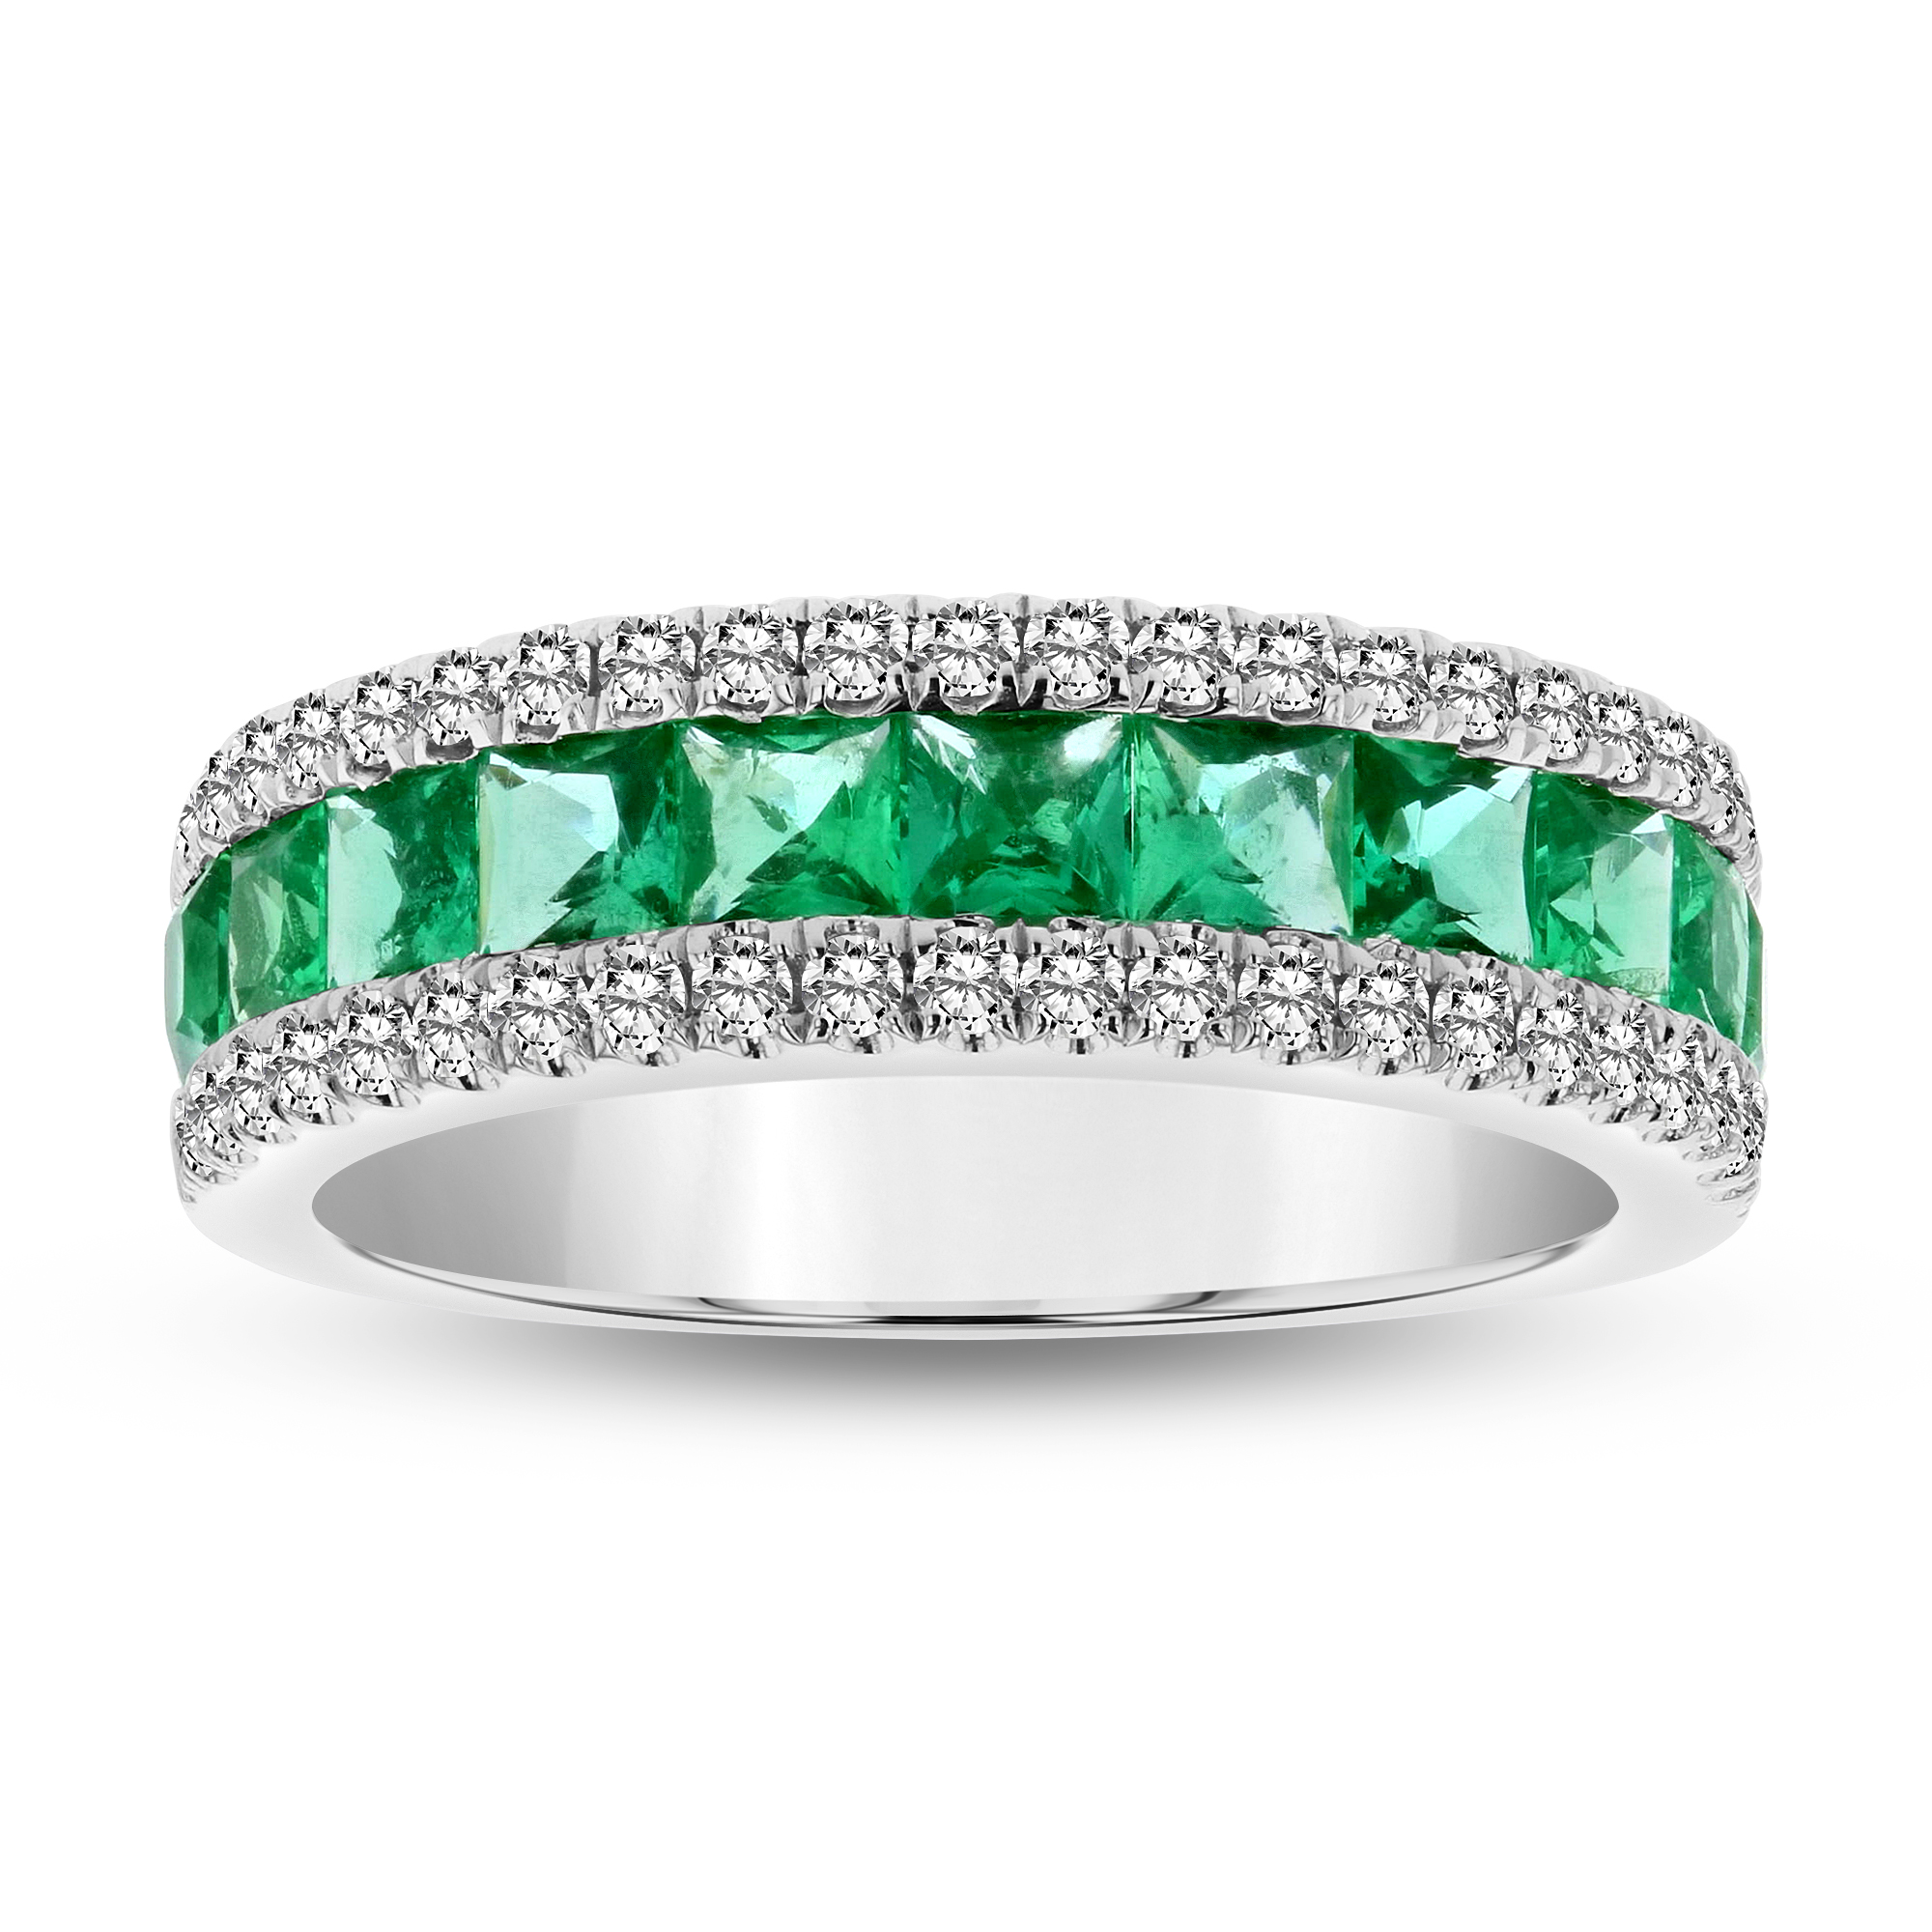 View 0.43ctw Diamond and Emerald Ring in 18k White Gold